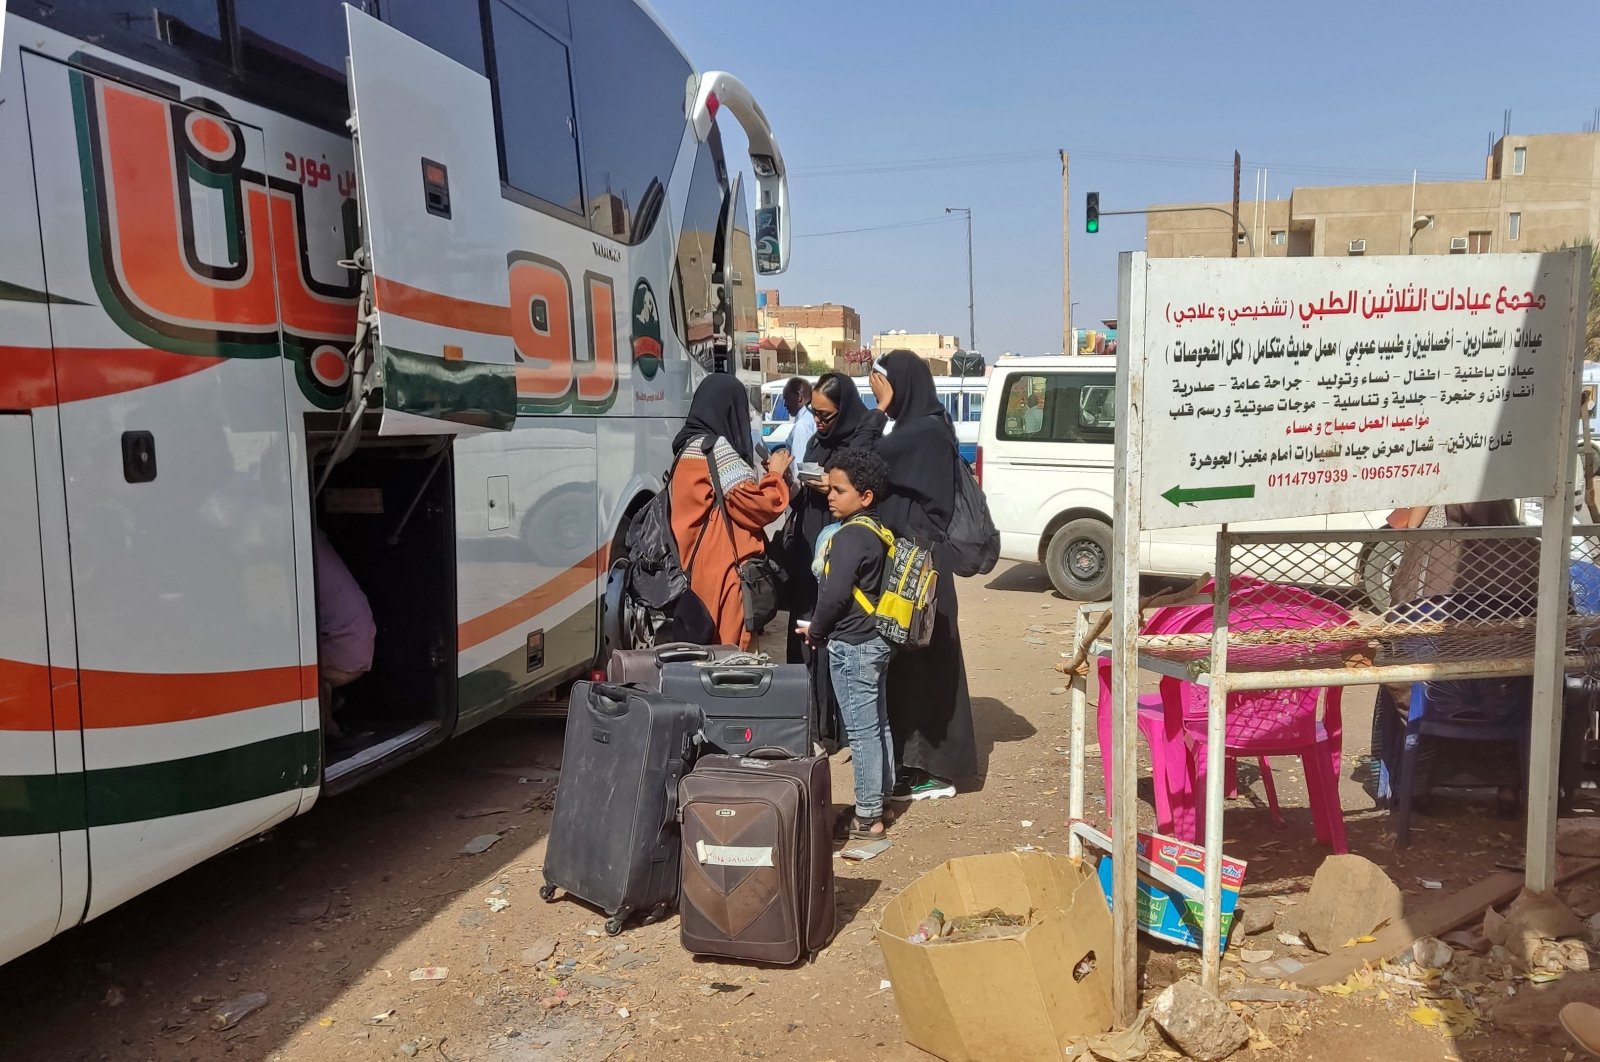 People wait with their luggage at a bus stop in southern Khartoum as fighting continues between Sudan&#039;s army and the paramilitary forces, May 8, 2023. (AFP Photo)